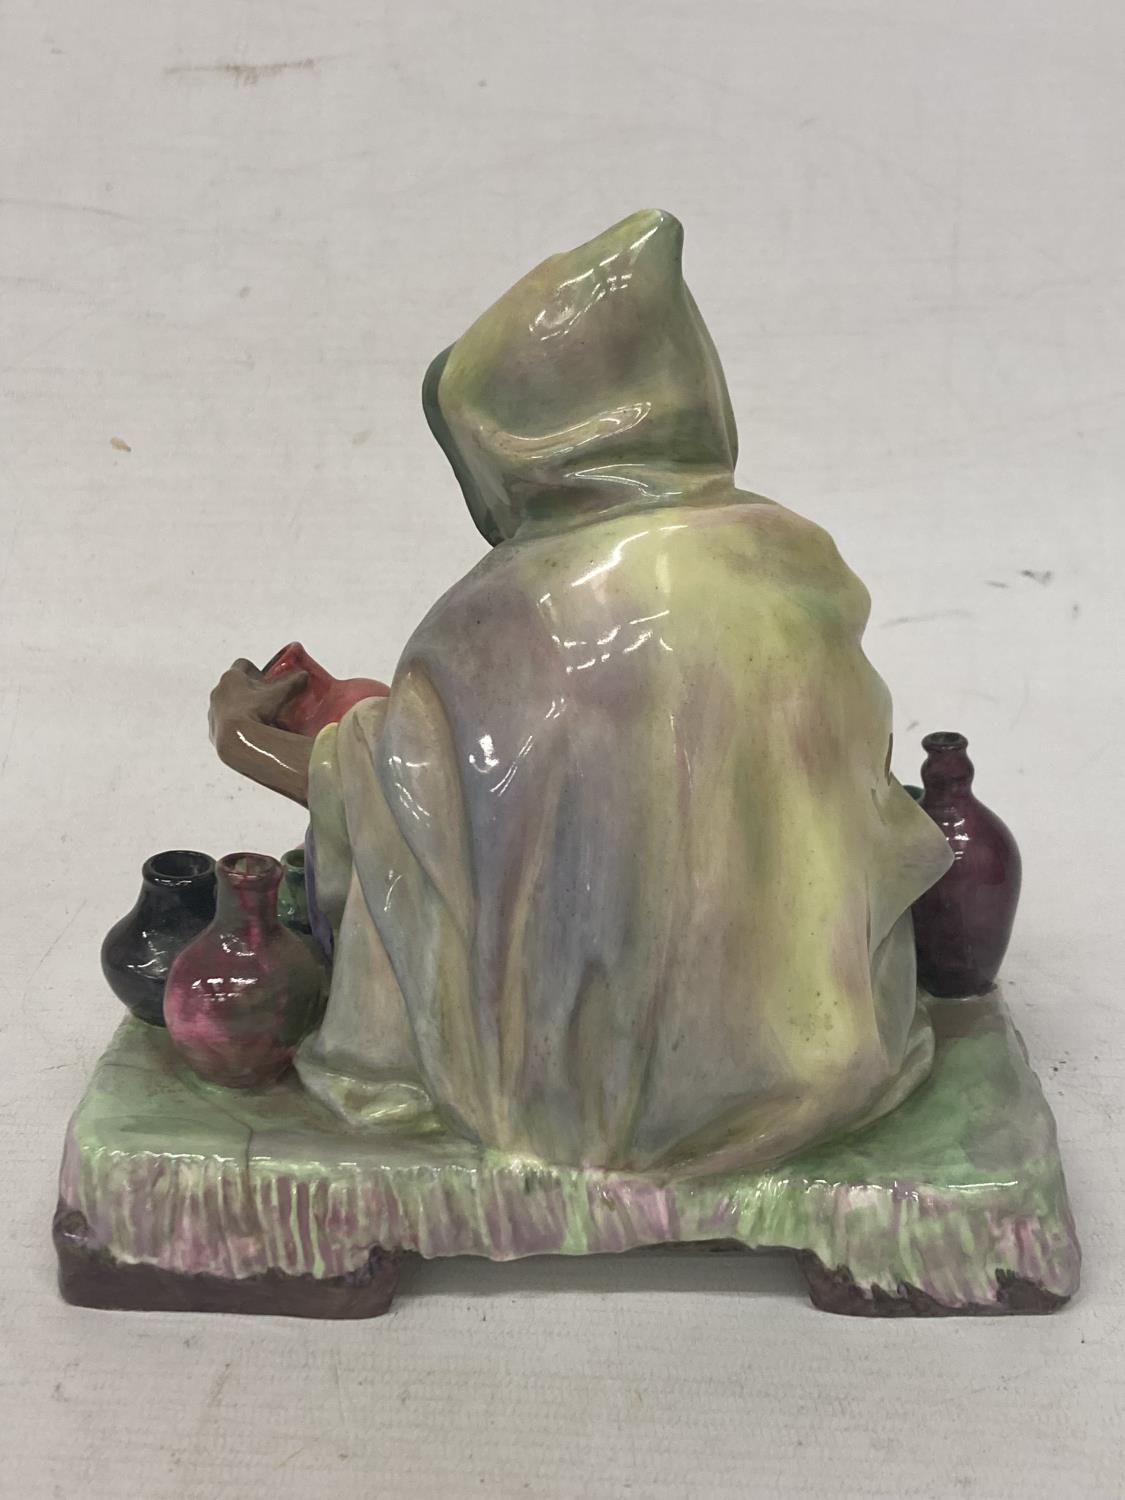 A ROYAL DOULTON FIGURE "THE POTTER" HN 1518 (A/F) - Image 3 of 5